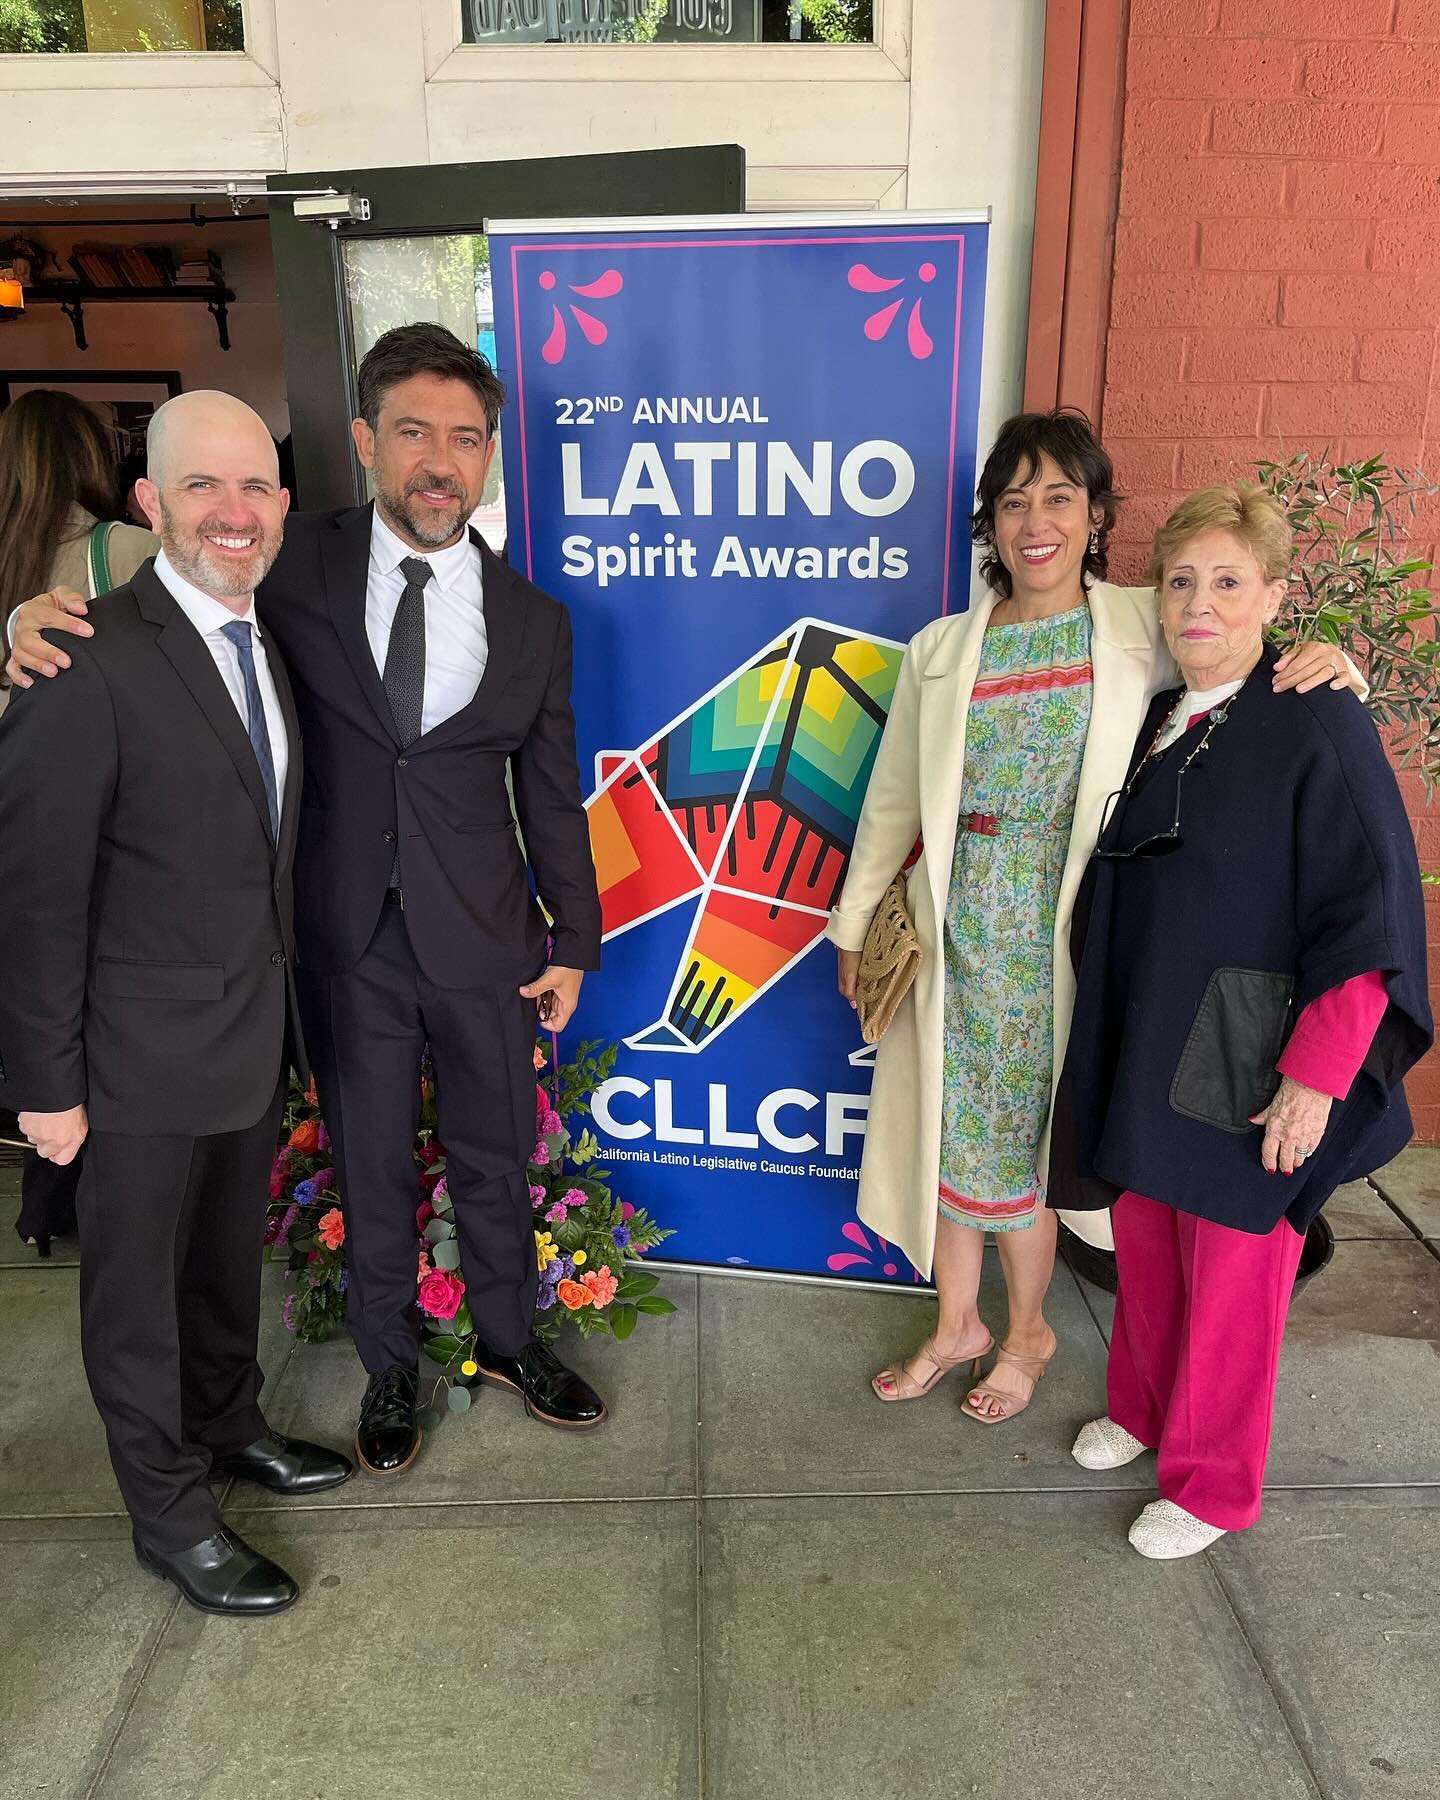 Eternally honored and grateful to the California Latino Legislative Caucus for the 2024 Latino Spirit Award. To be in the same room with such an accomplished group of people was truly mind blowing. To share the unforgettable moment with my husband, b